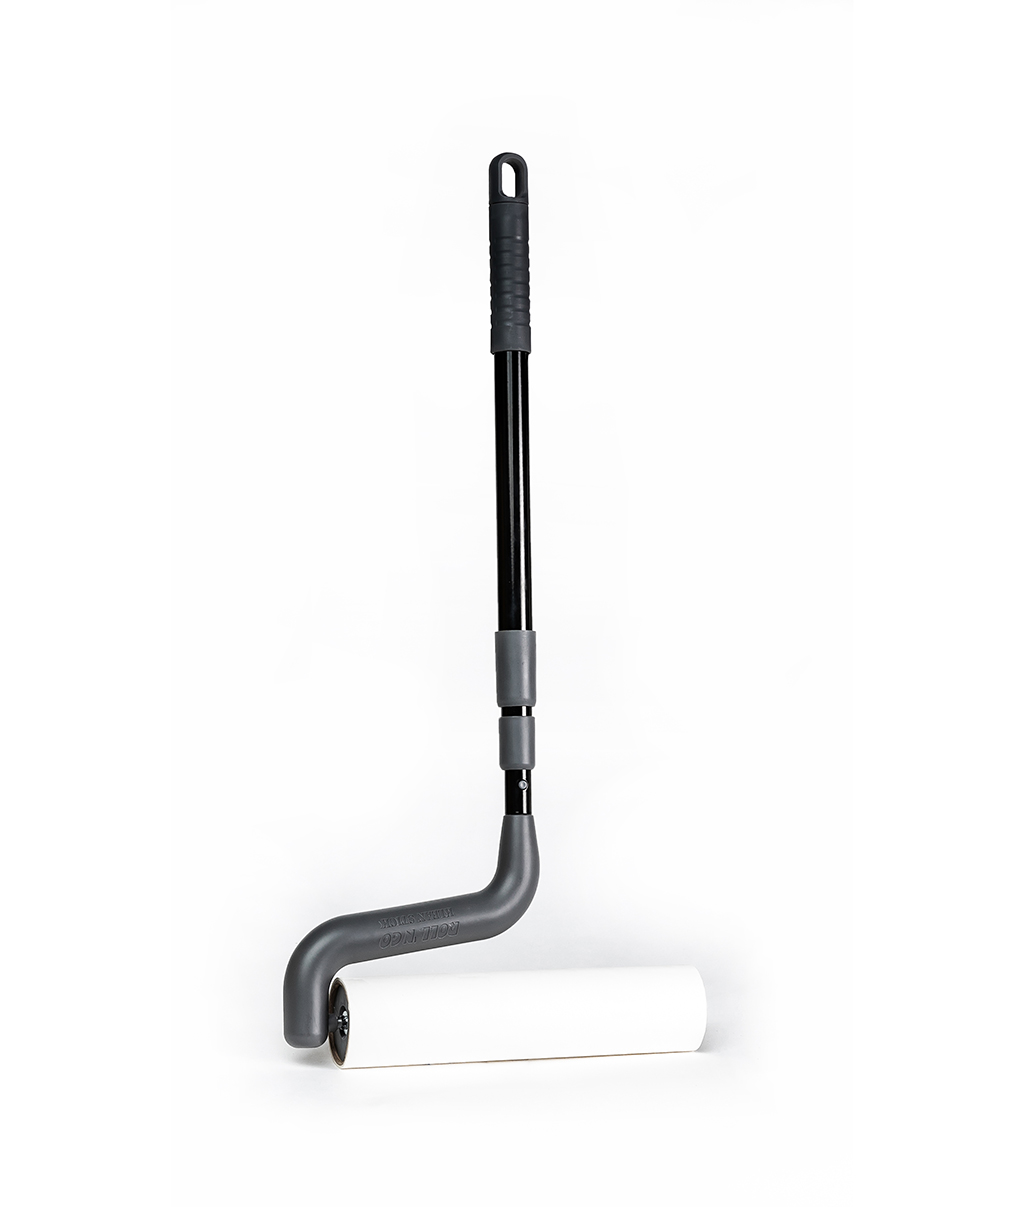 Roll 'N Go Klean Stick - 10” Adhesive Cleaning Roller